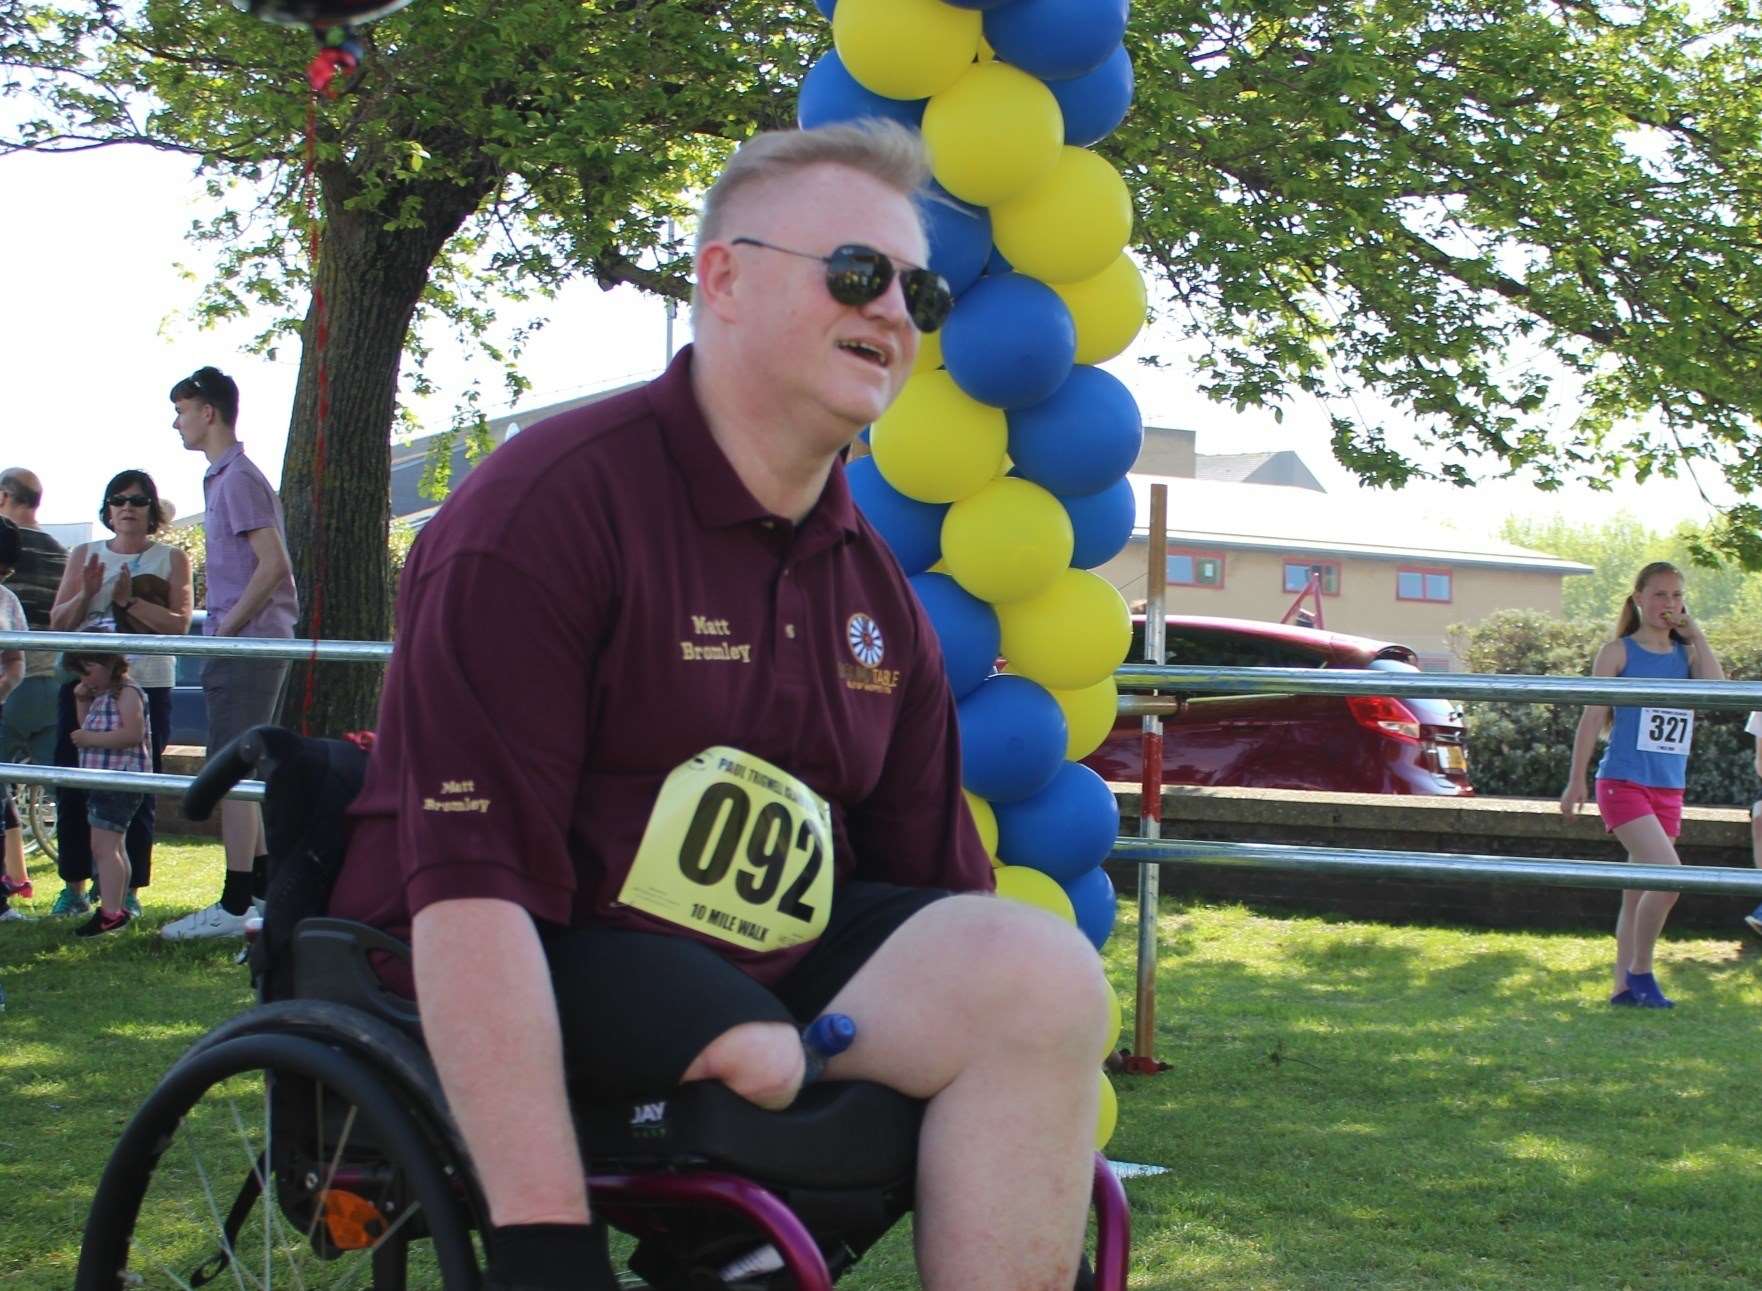 Last year one-legged Round Tabler Matt Bromley became the first person in a wheelchair to complete the 10-mile as he arrived at the Beachfields finishing line.